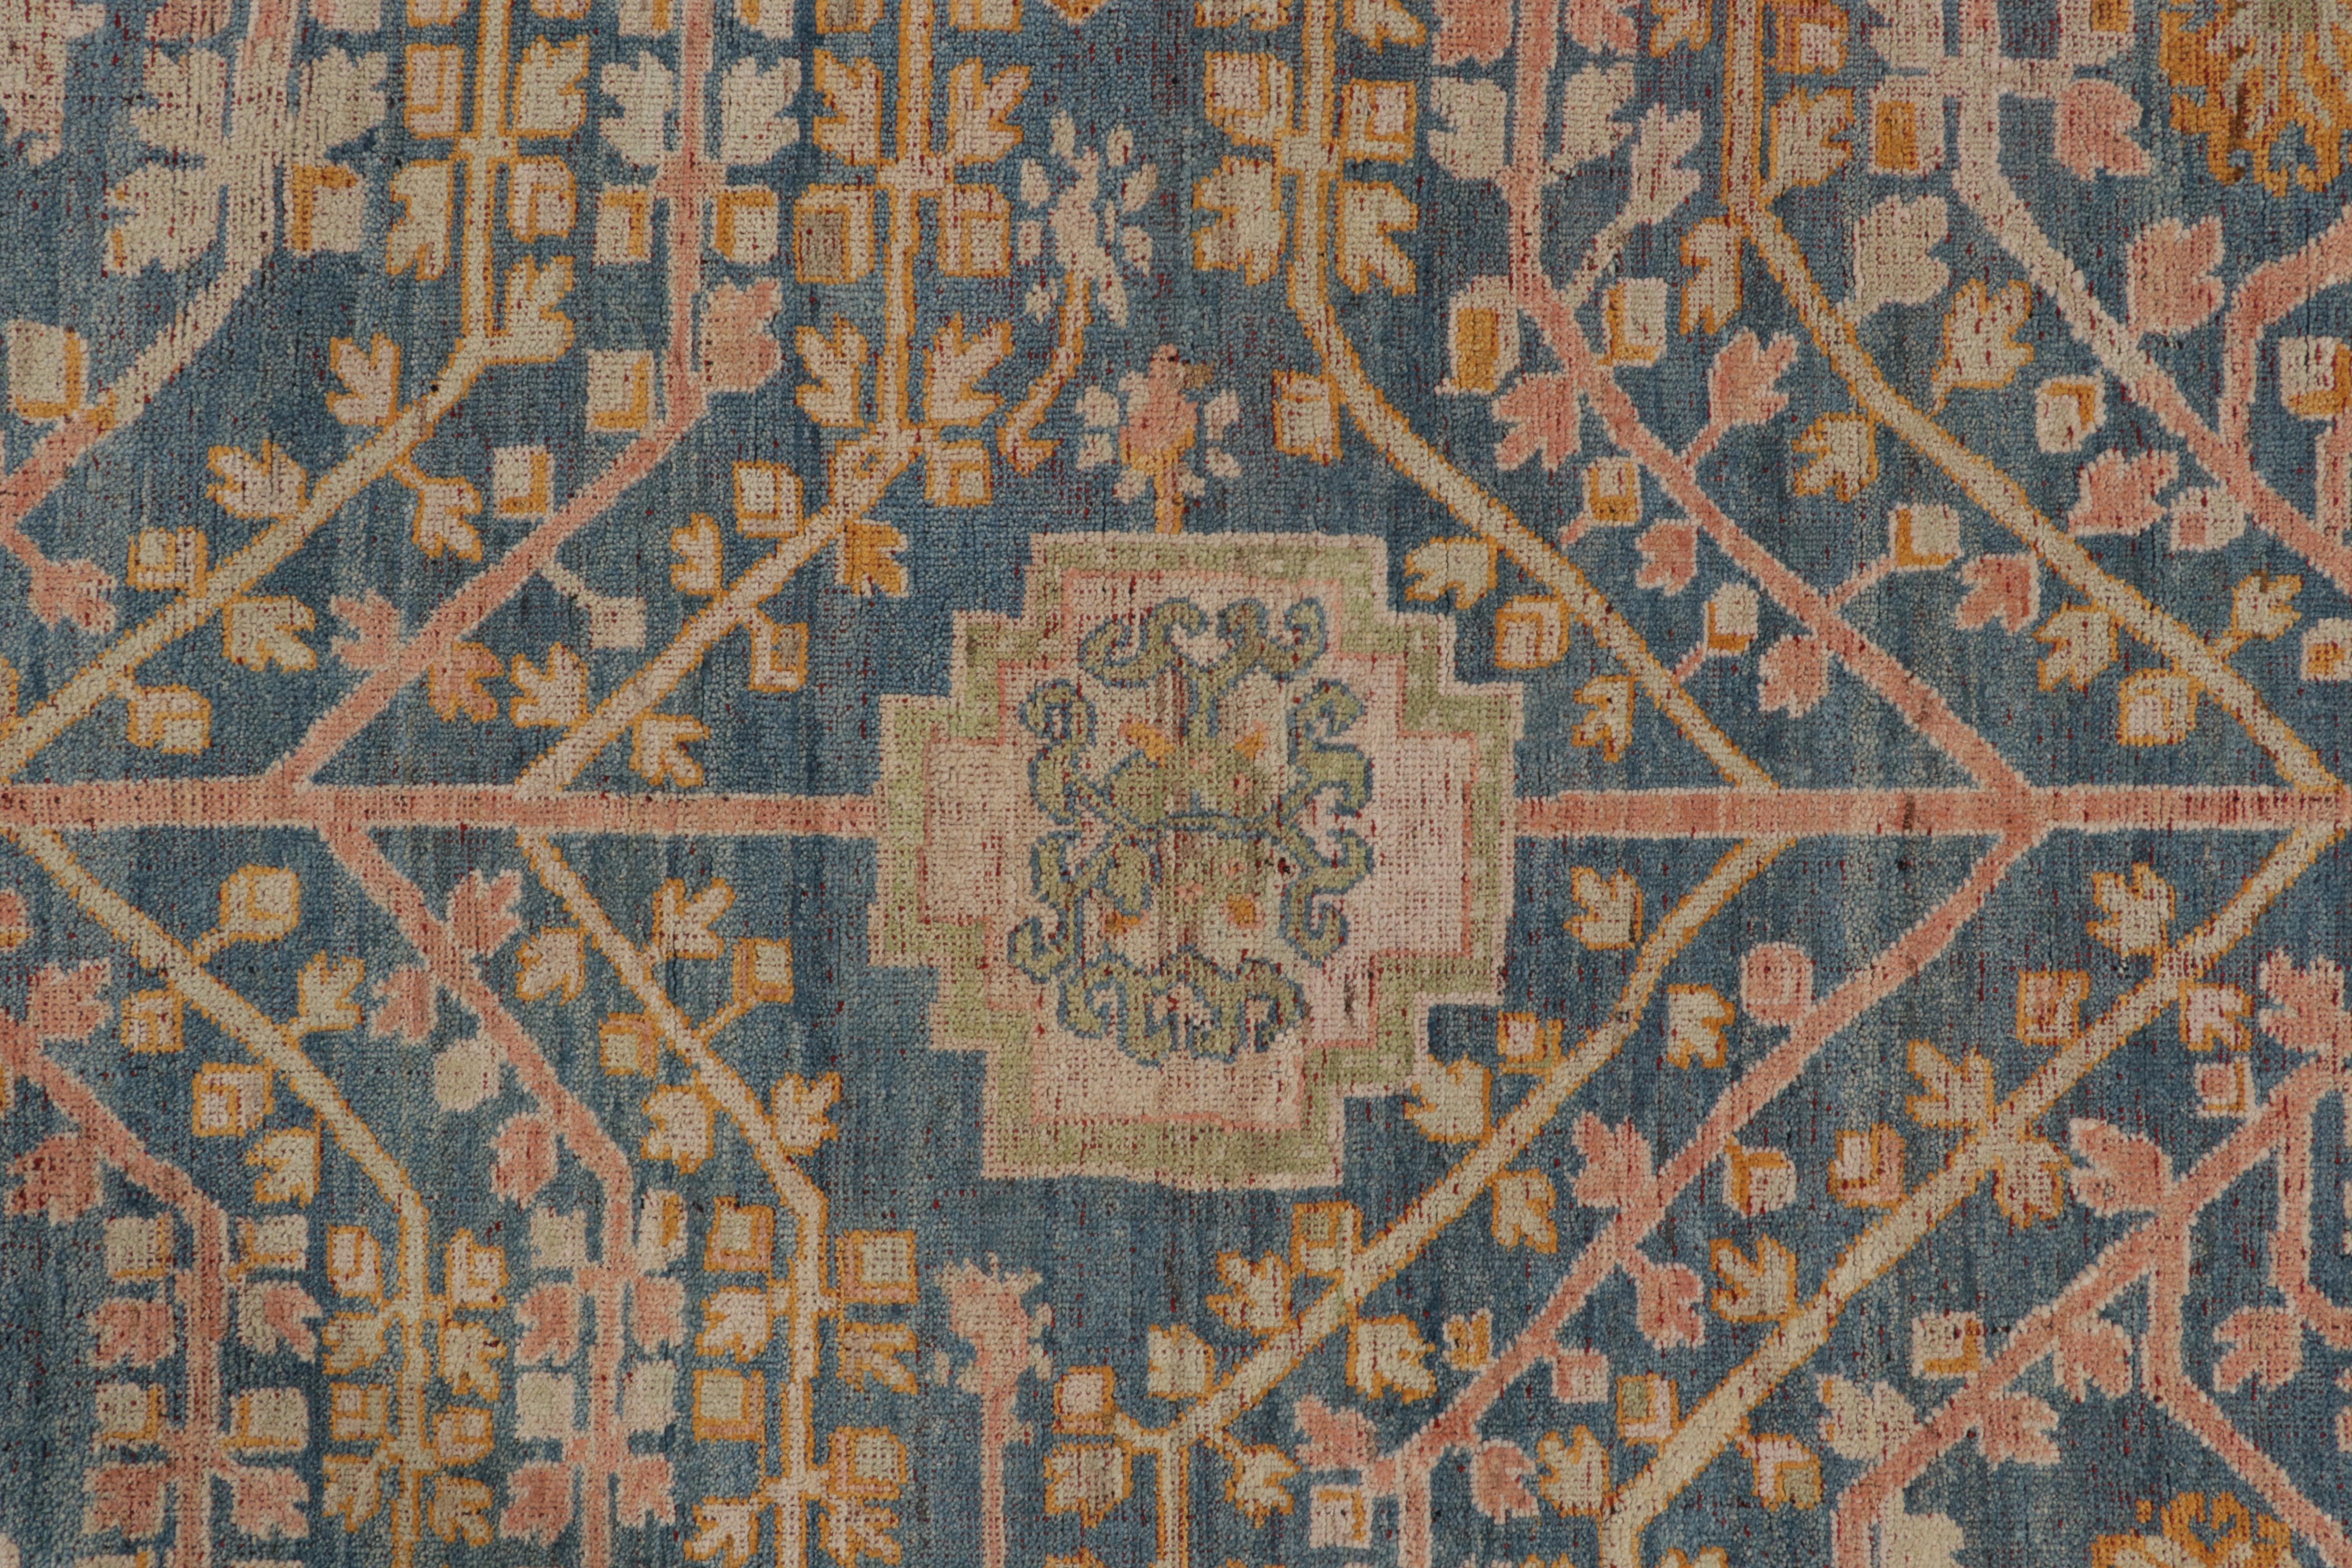 Contemporary Rug & Kilim’s Khotan Style Rug in Blue, Gold and Pink Geometric-Floral Patterns For Sale